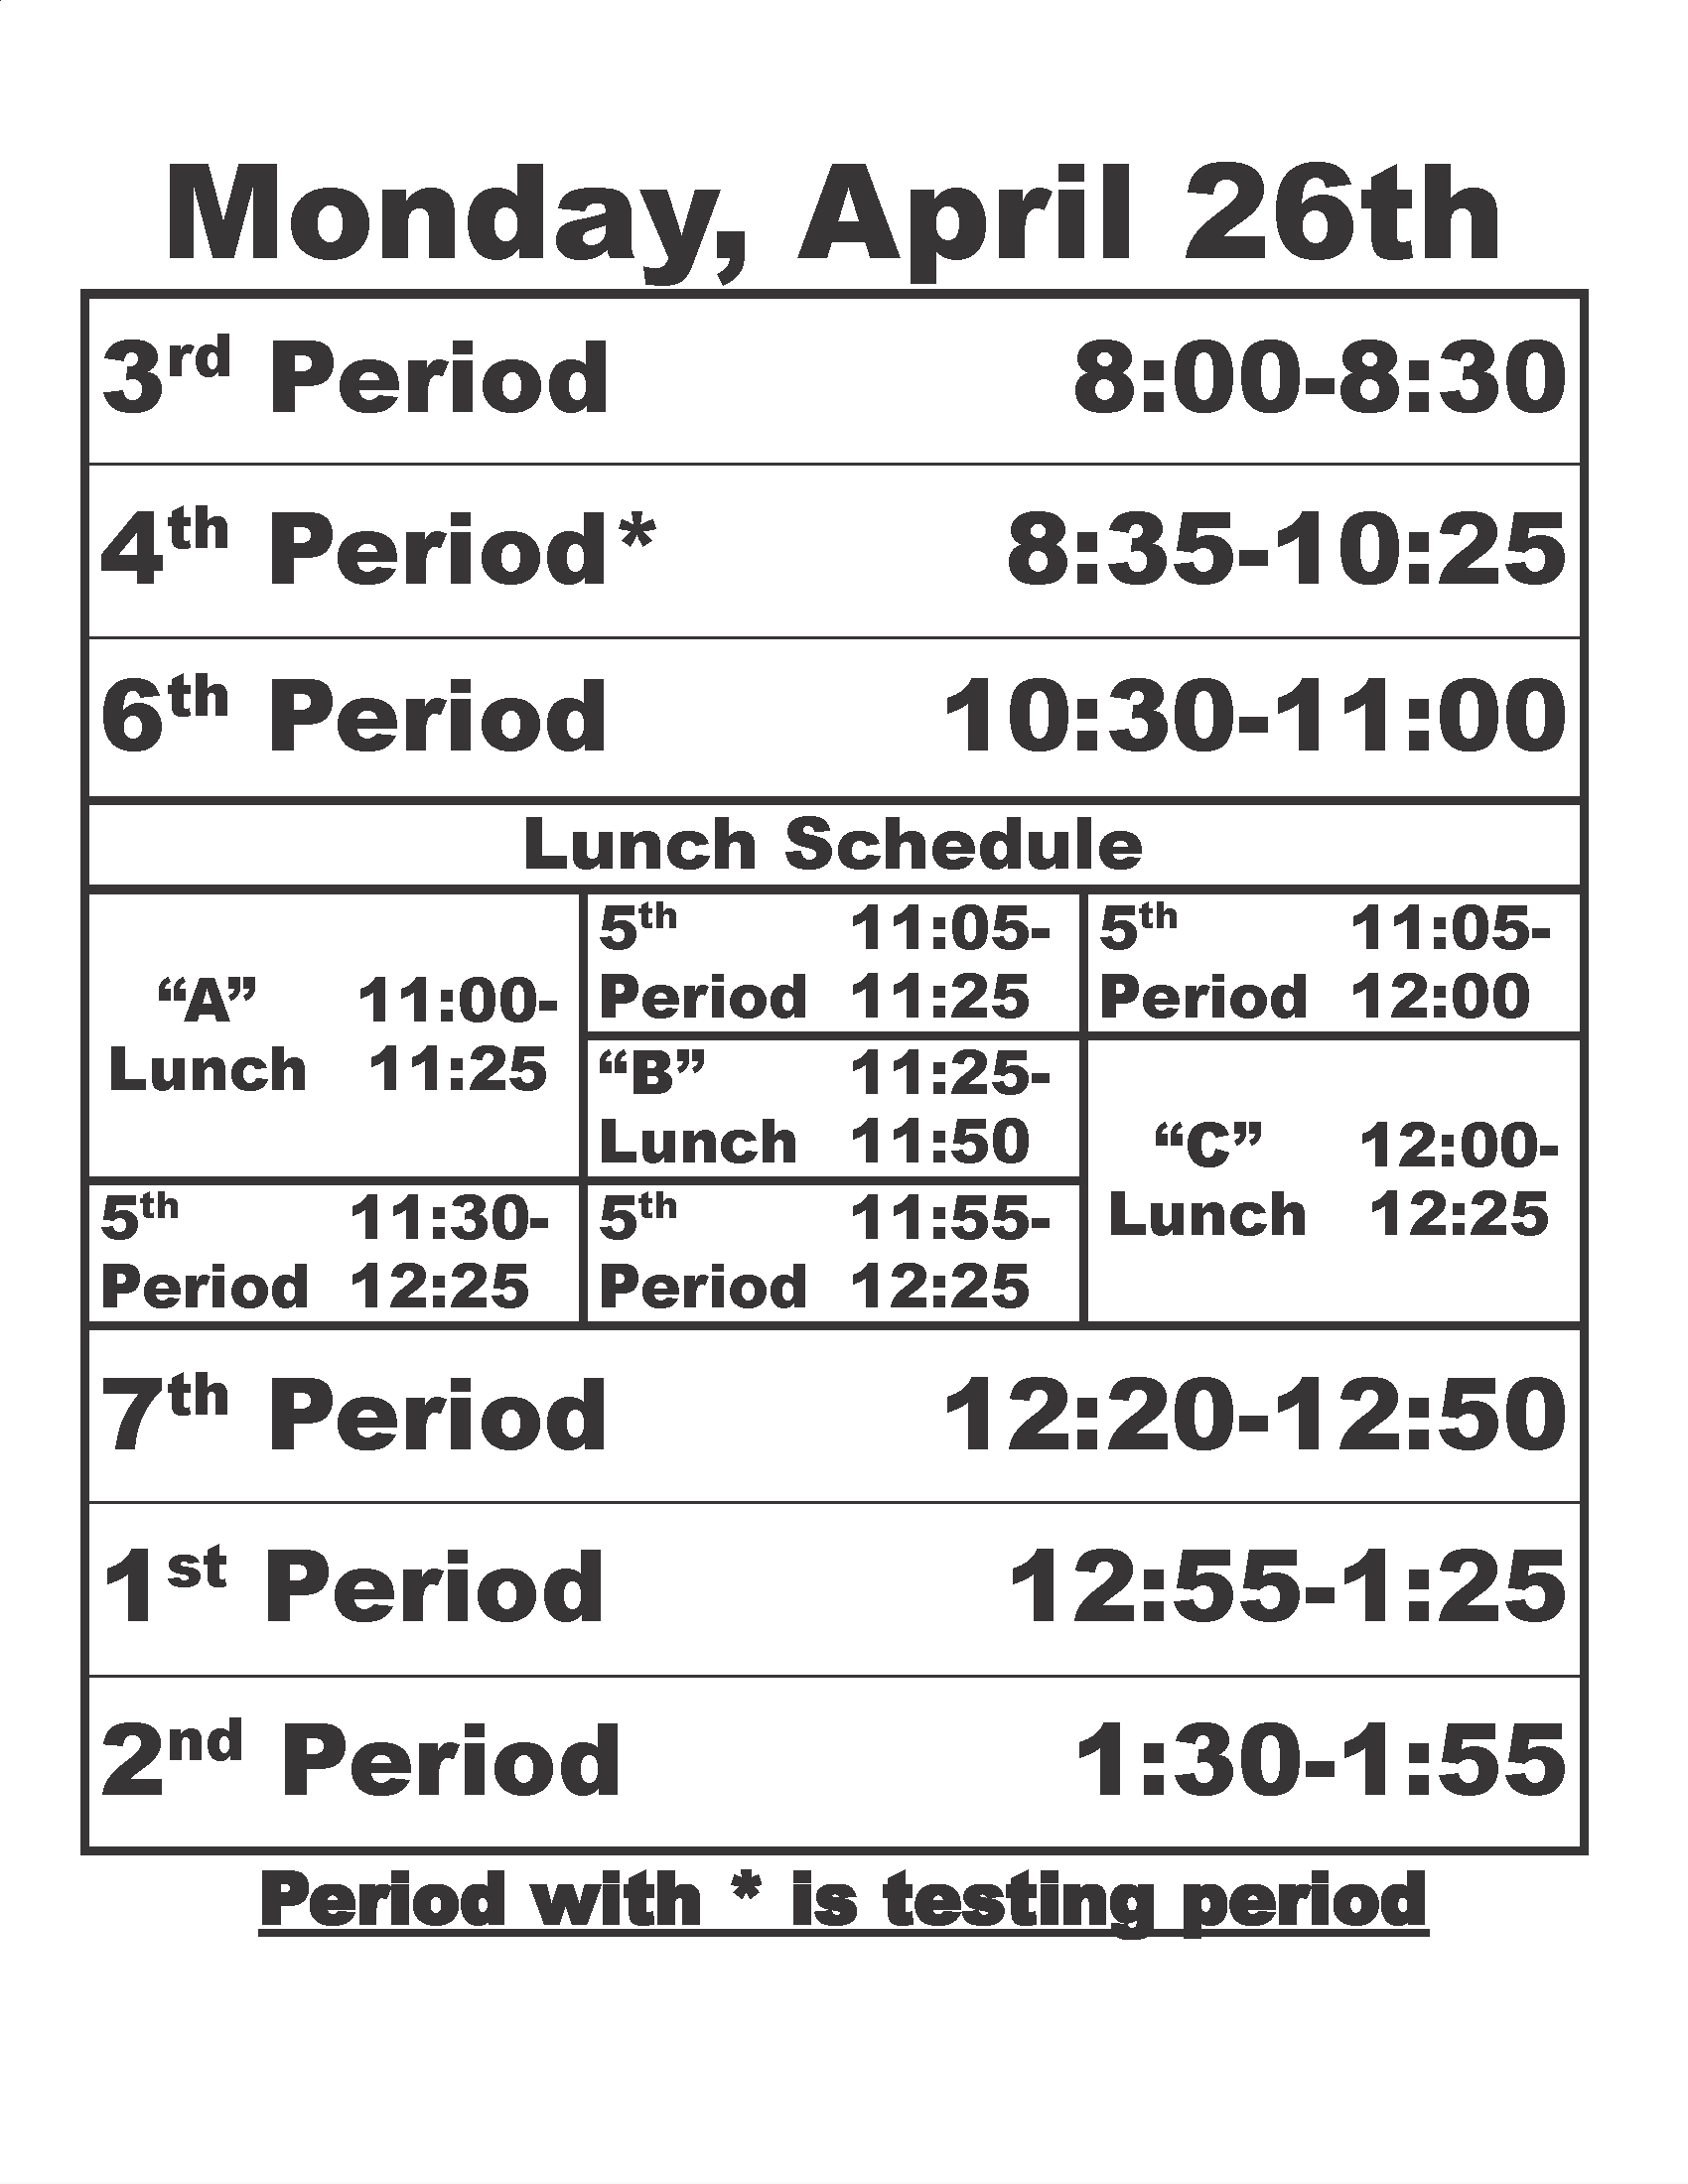 Schedules available in front office